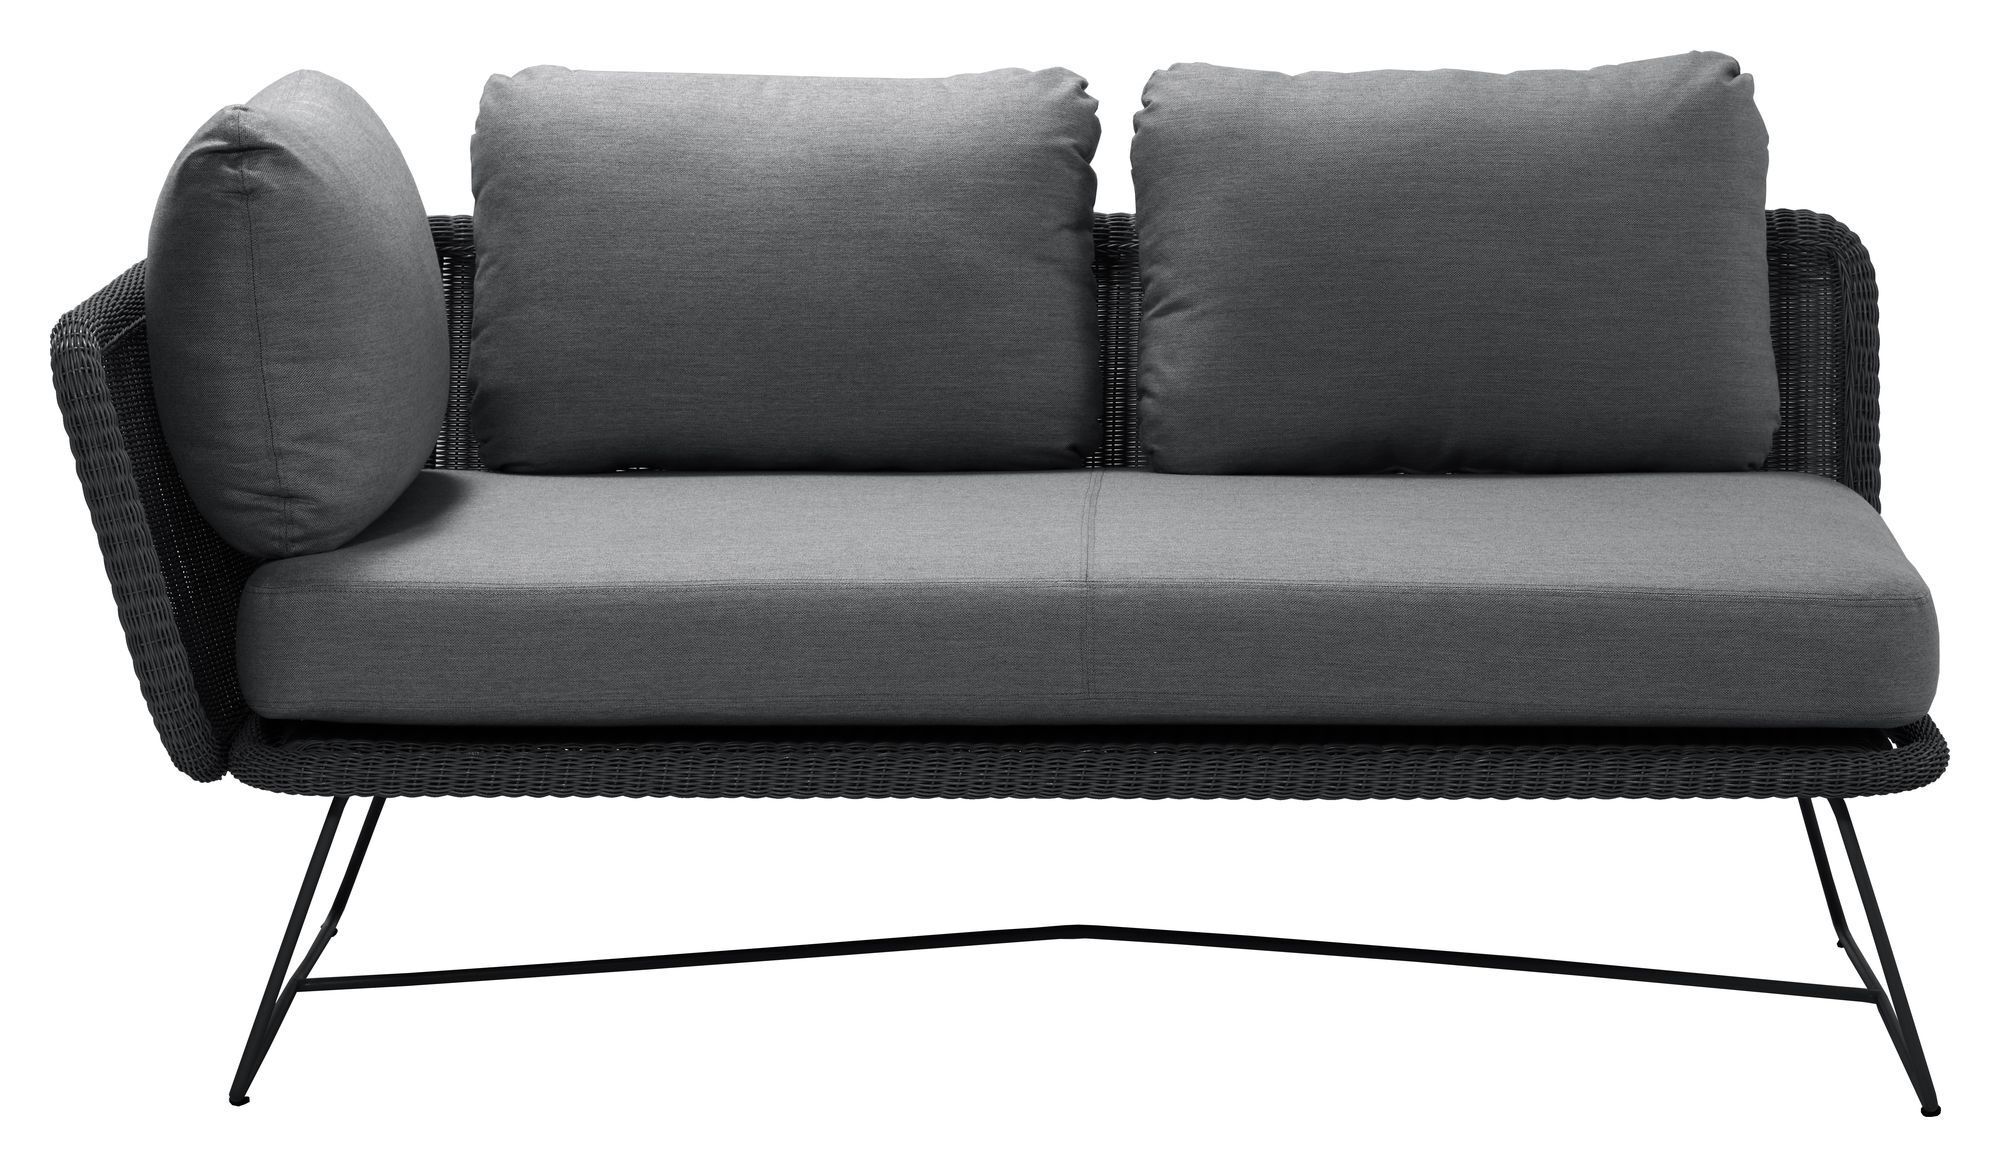 Cane-line Horizon 2-pers. Loungesofa høyre modul, Sort, Cane-line Weave   Unoliving